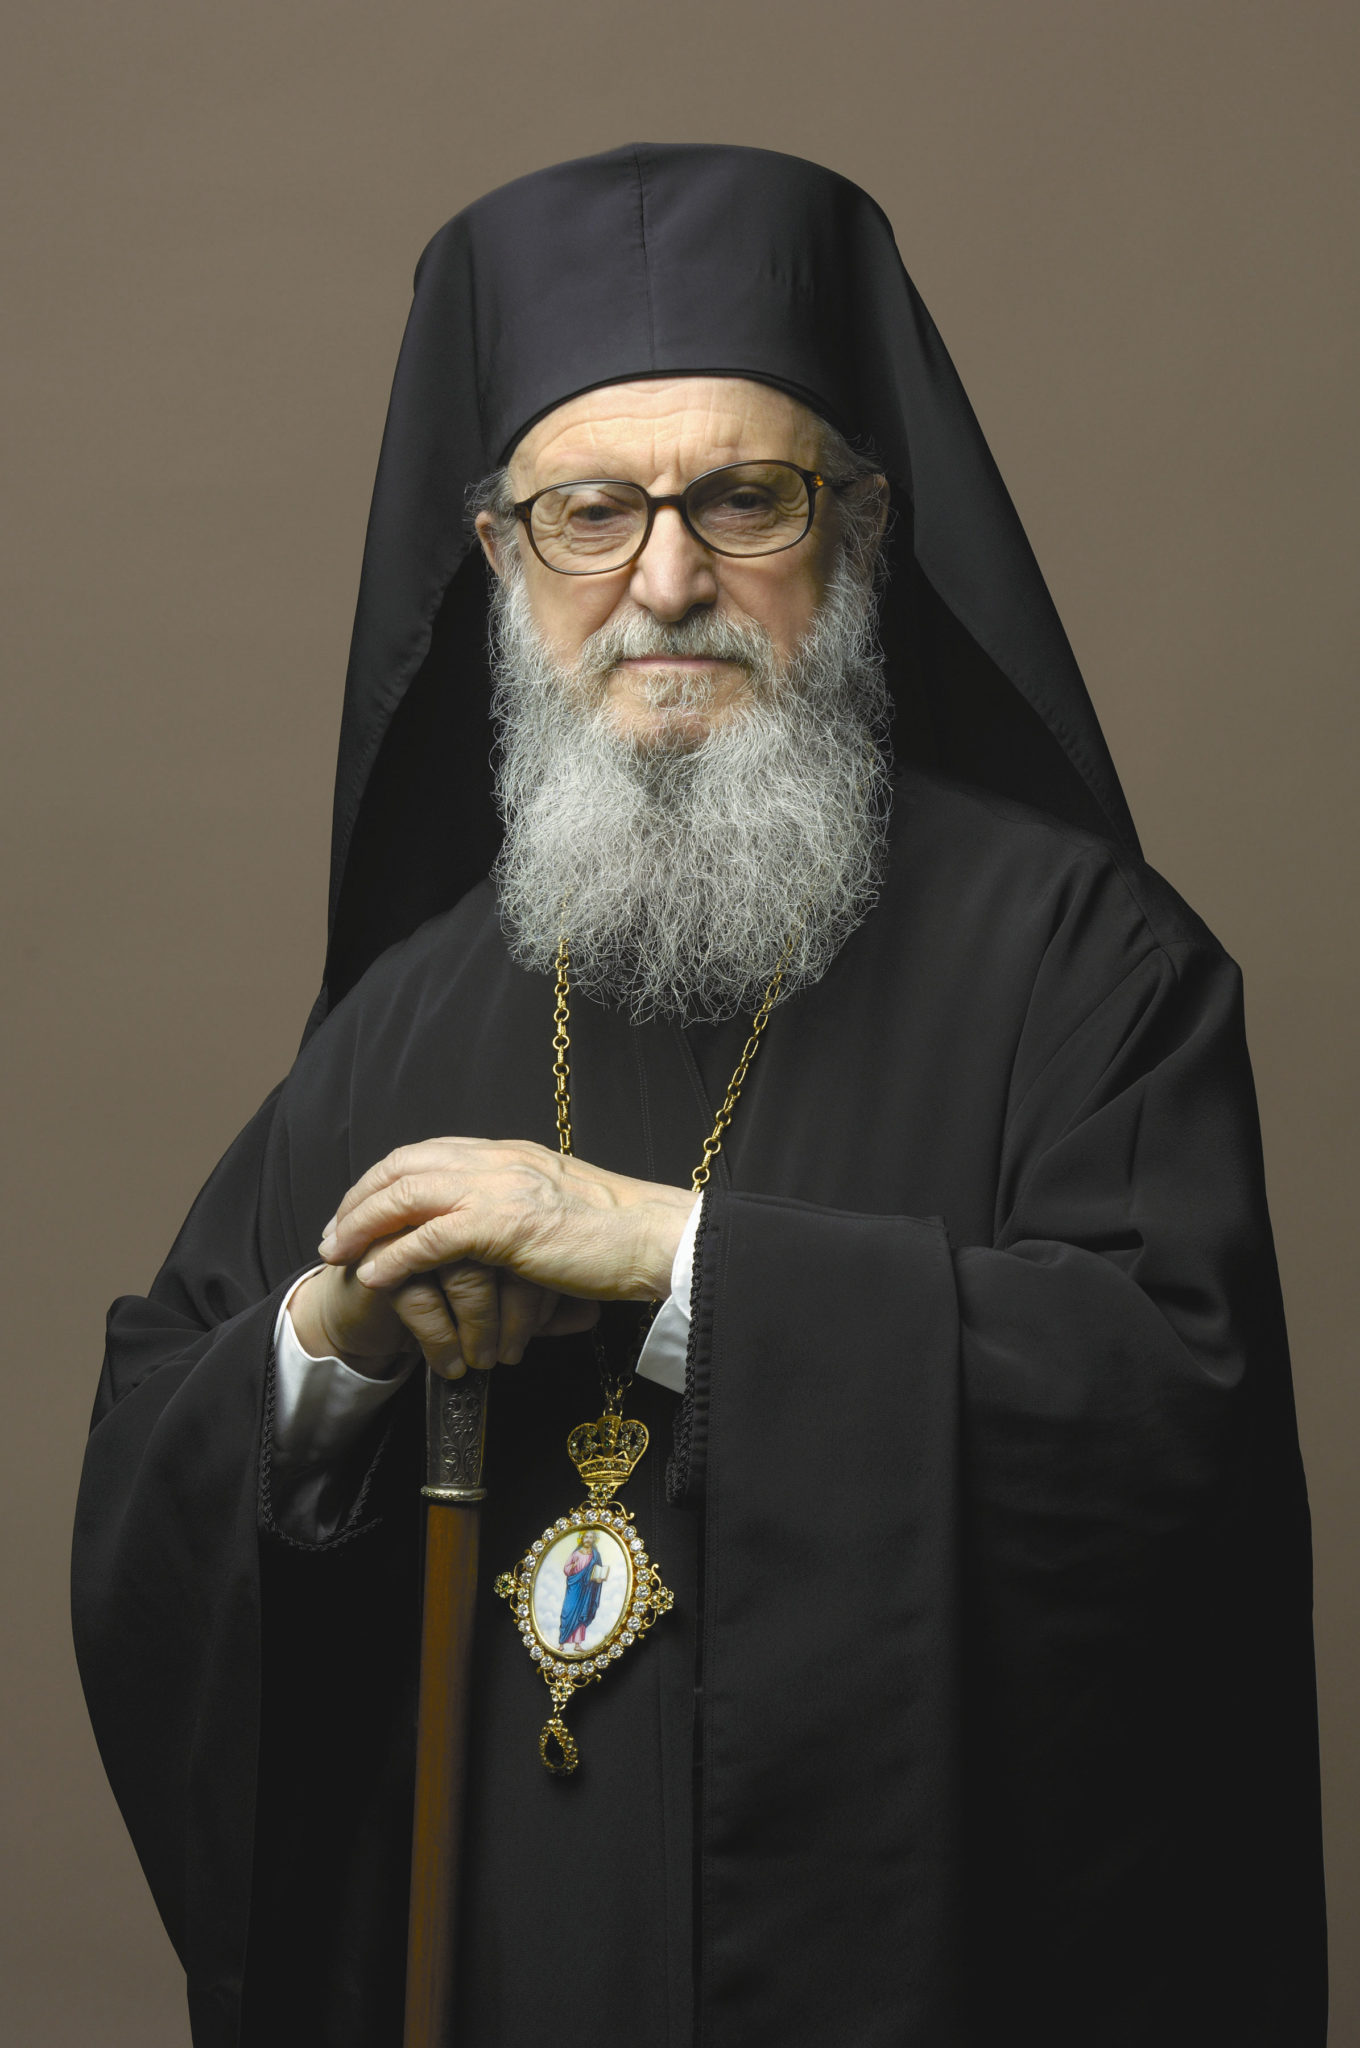 His Eminence Archbishop Demetrios (1928 - ), PhD, DTh, Primate of the Greek Orthodox Archdiocese of America and chairman of the Assembly of Canonical Orthodox Bishops of North and Central America.